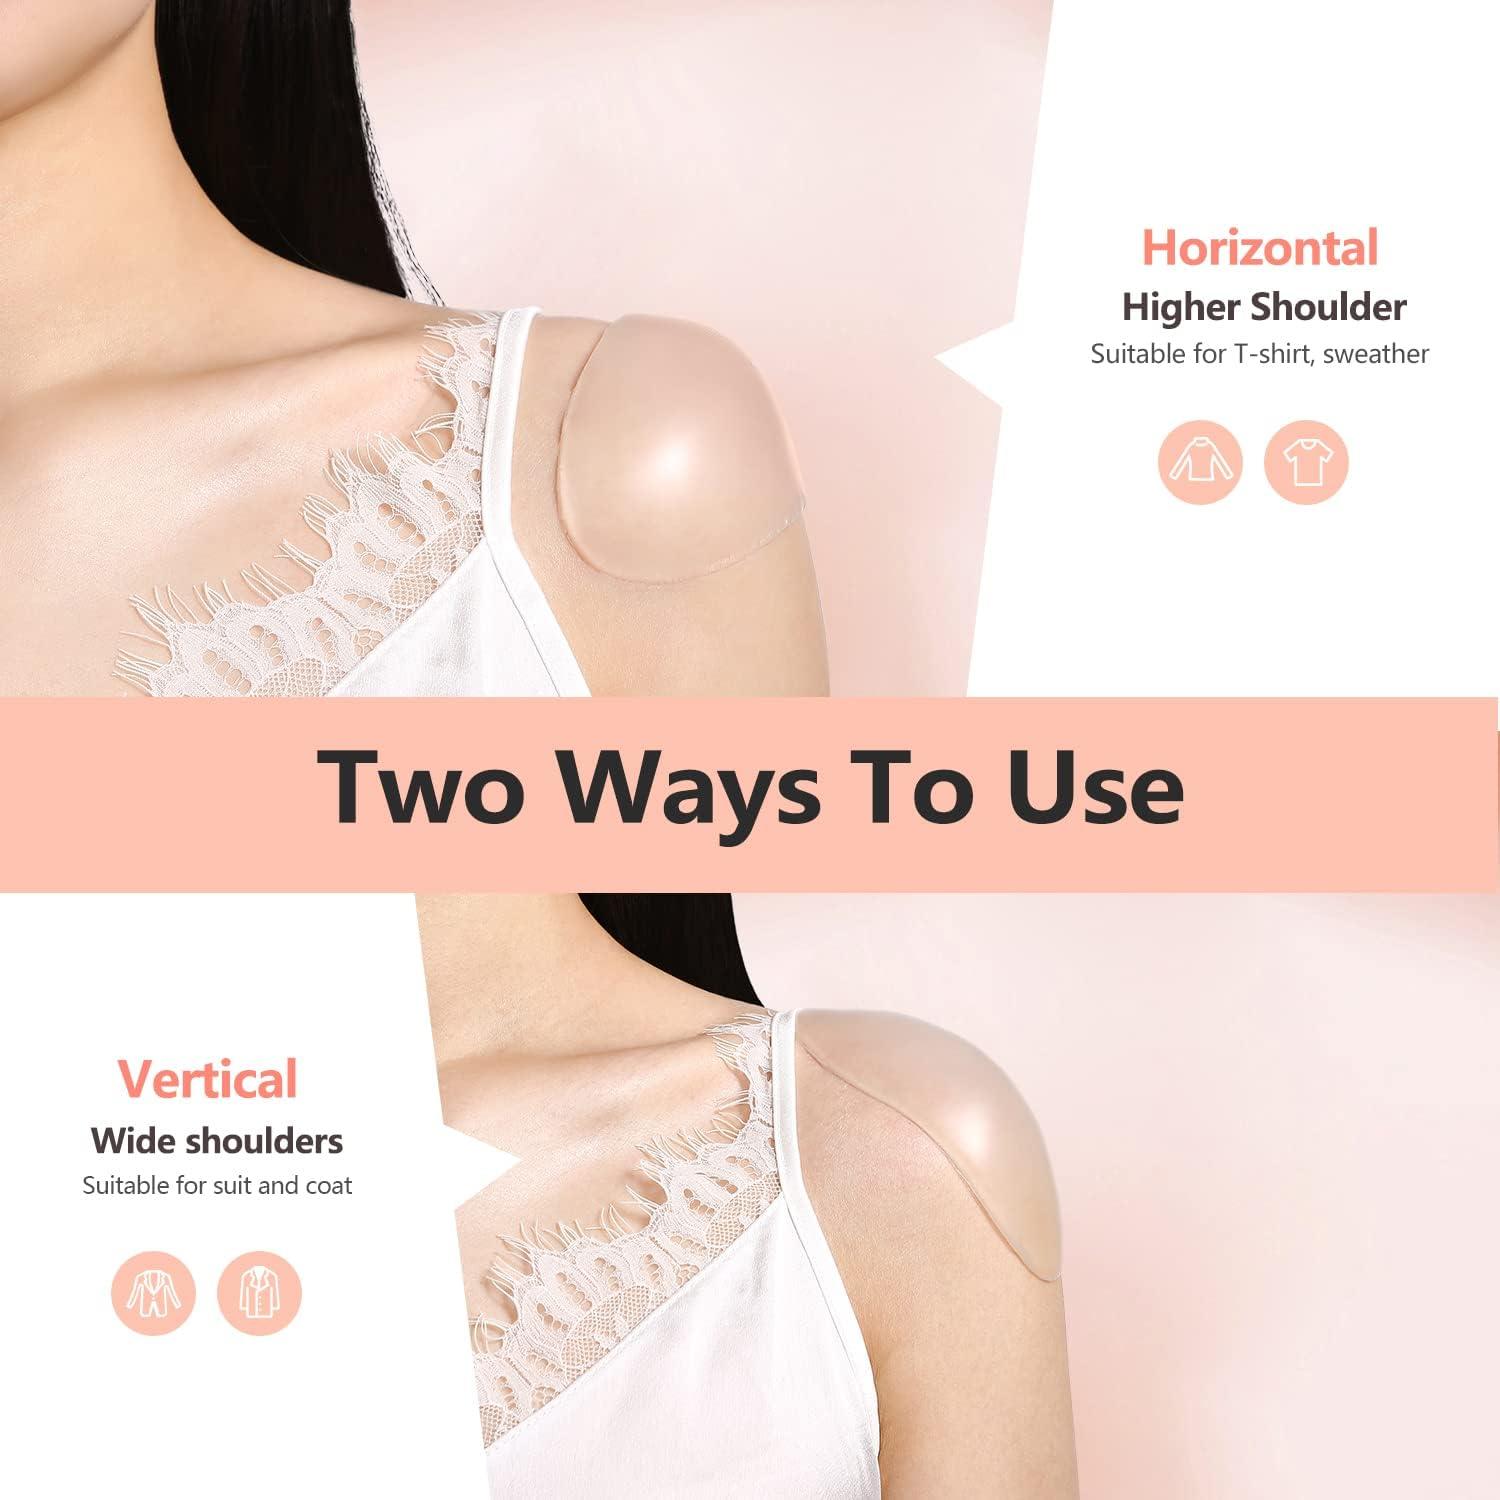 2 Pairs Large Invisible Shoulder Pads for Womens Clothing, Reusable Soft  Silicone Shoulder Pads, Anti Slip Shoulder Pads for Women Clothing Dress -  Skin color 